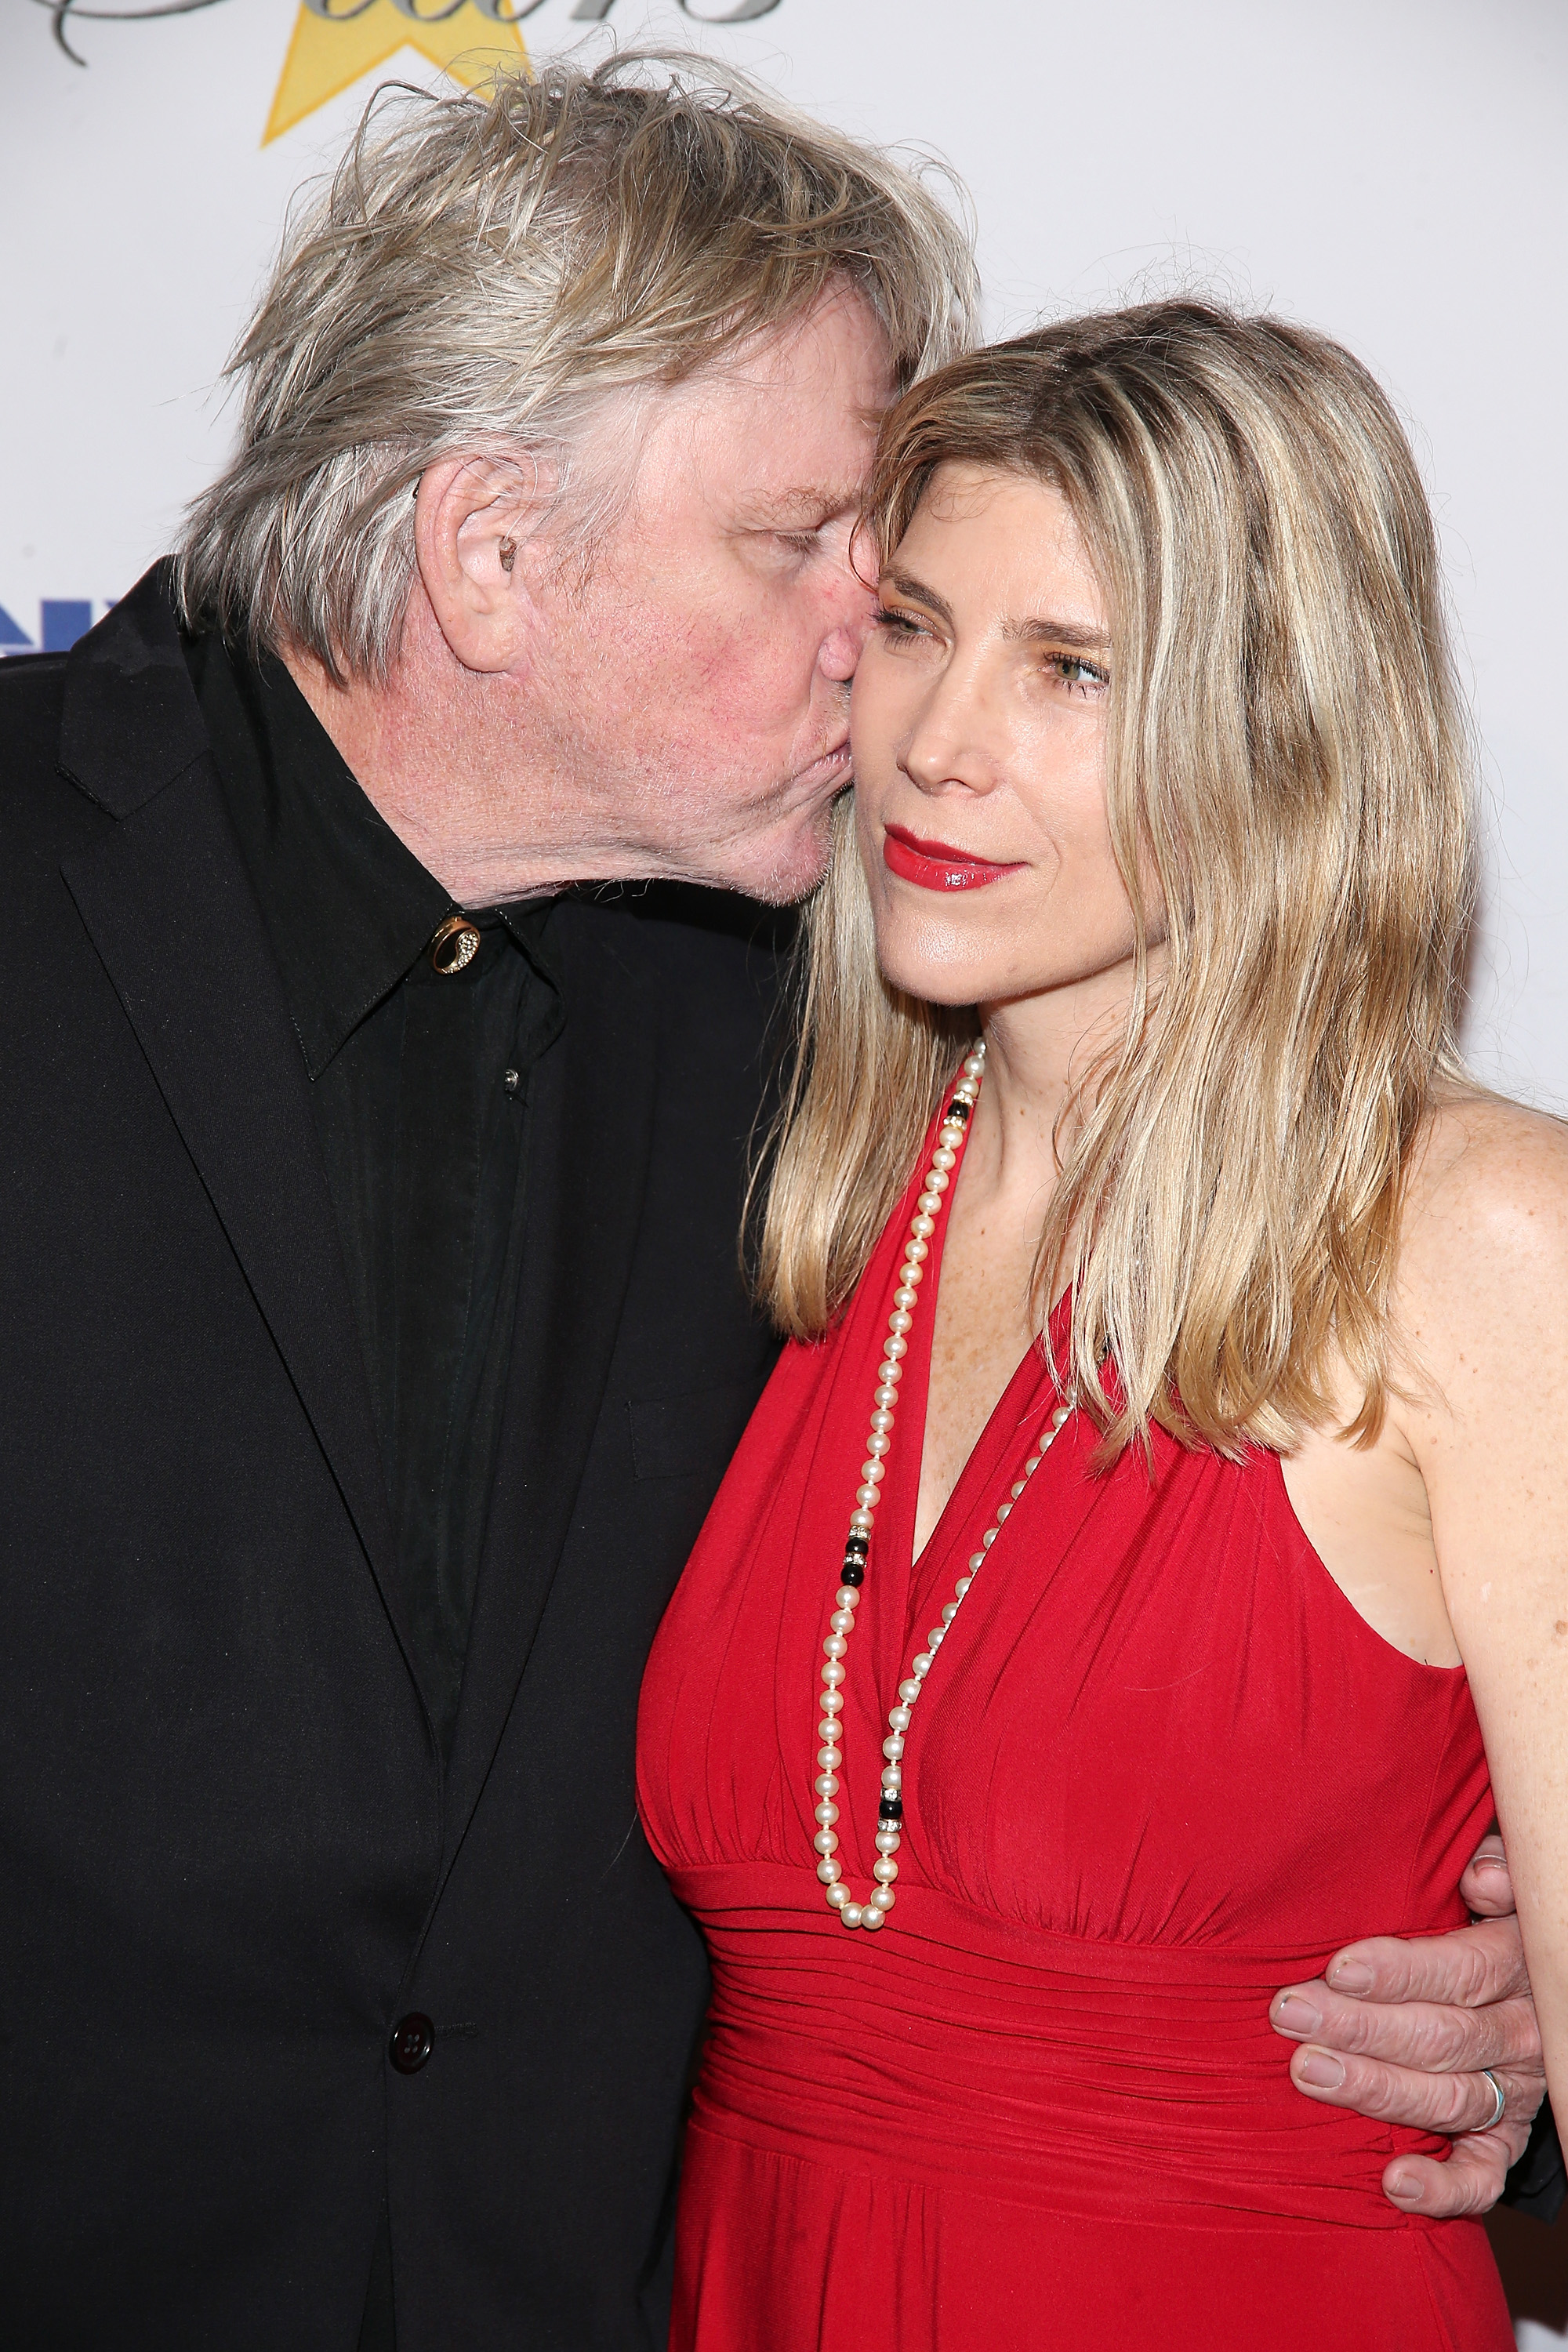 Gary Busey and Steffanie Sampson Busey attend the 27th Annual Night Of 100 Stars Black Tie Dinner Viewing Gala at the Beverly Hilton Hotel on February 26, 2017 in Beverly Hills, California. | Source: Getty Images